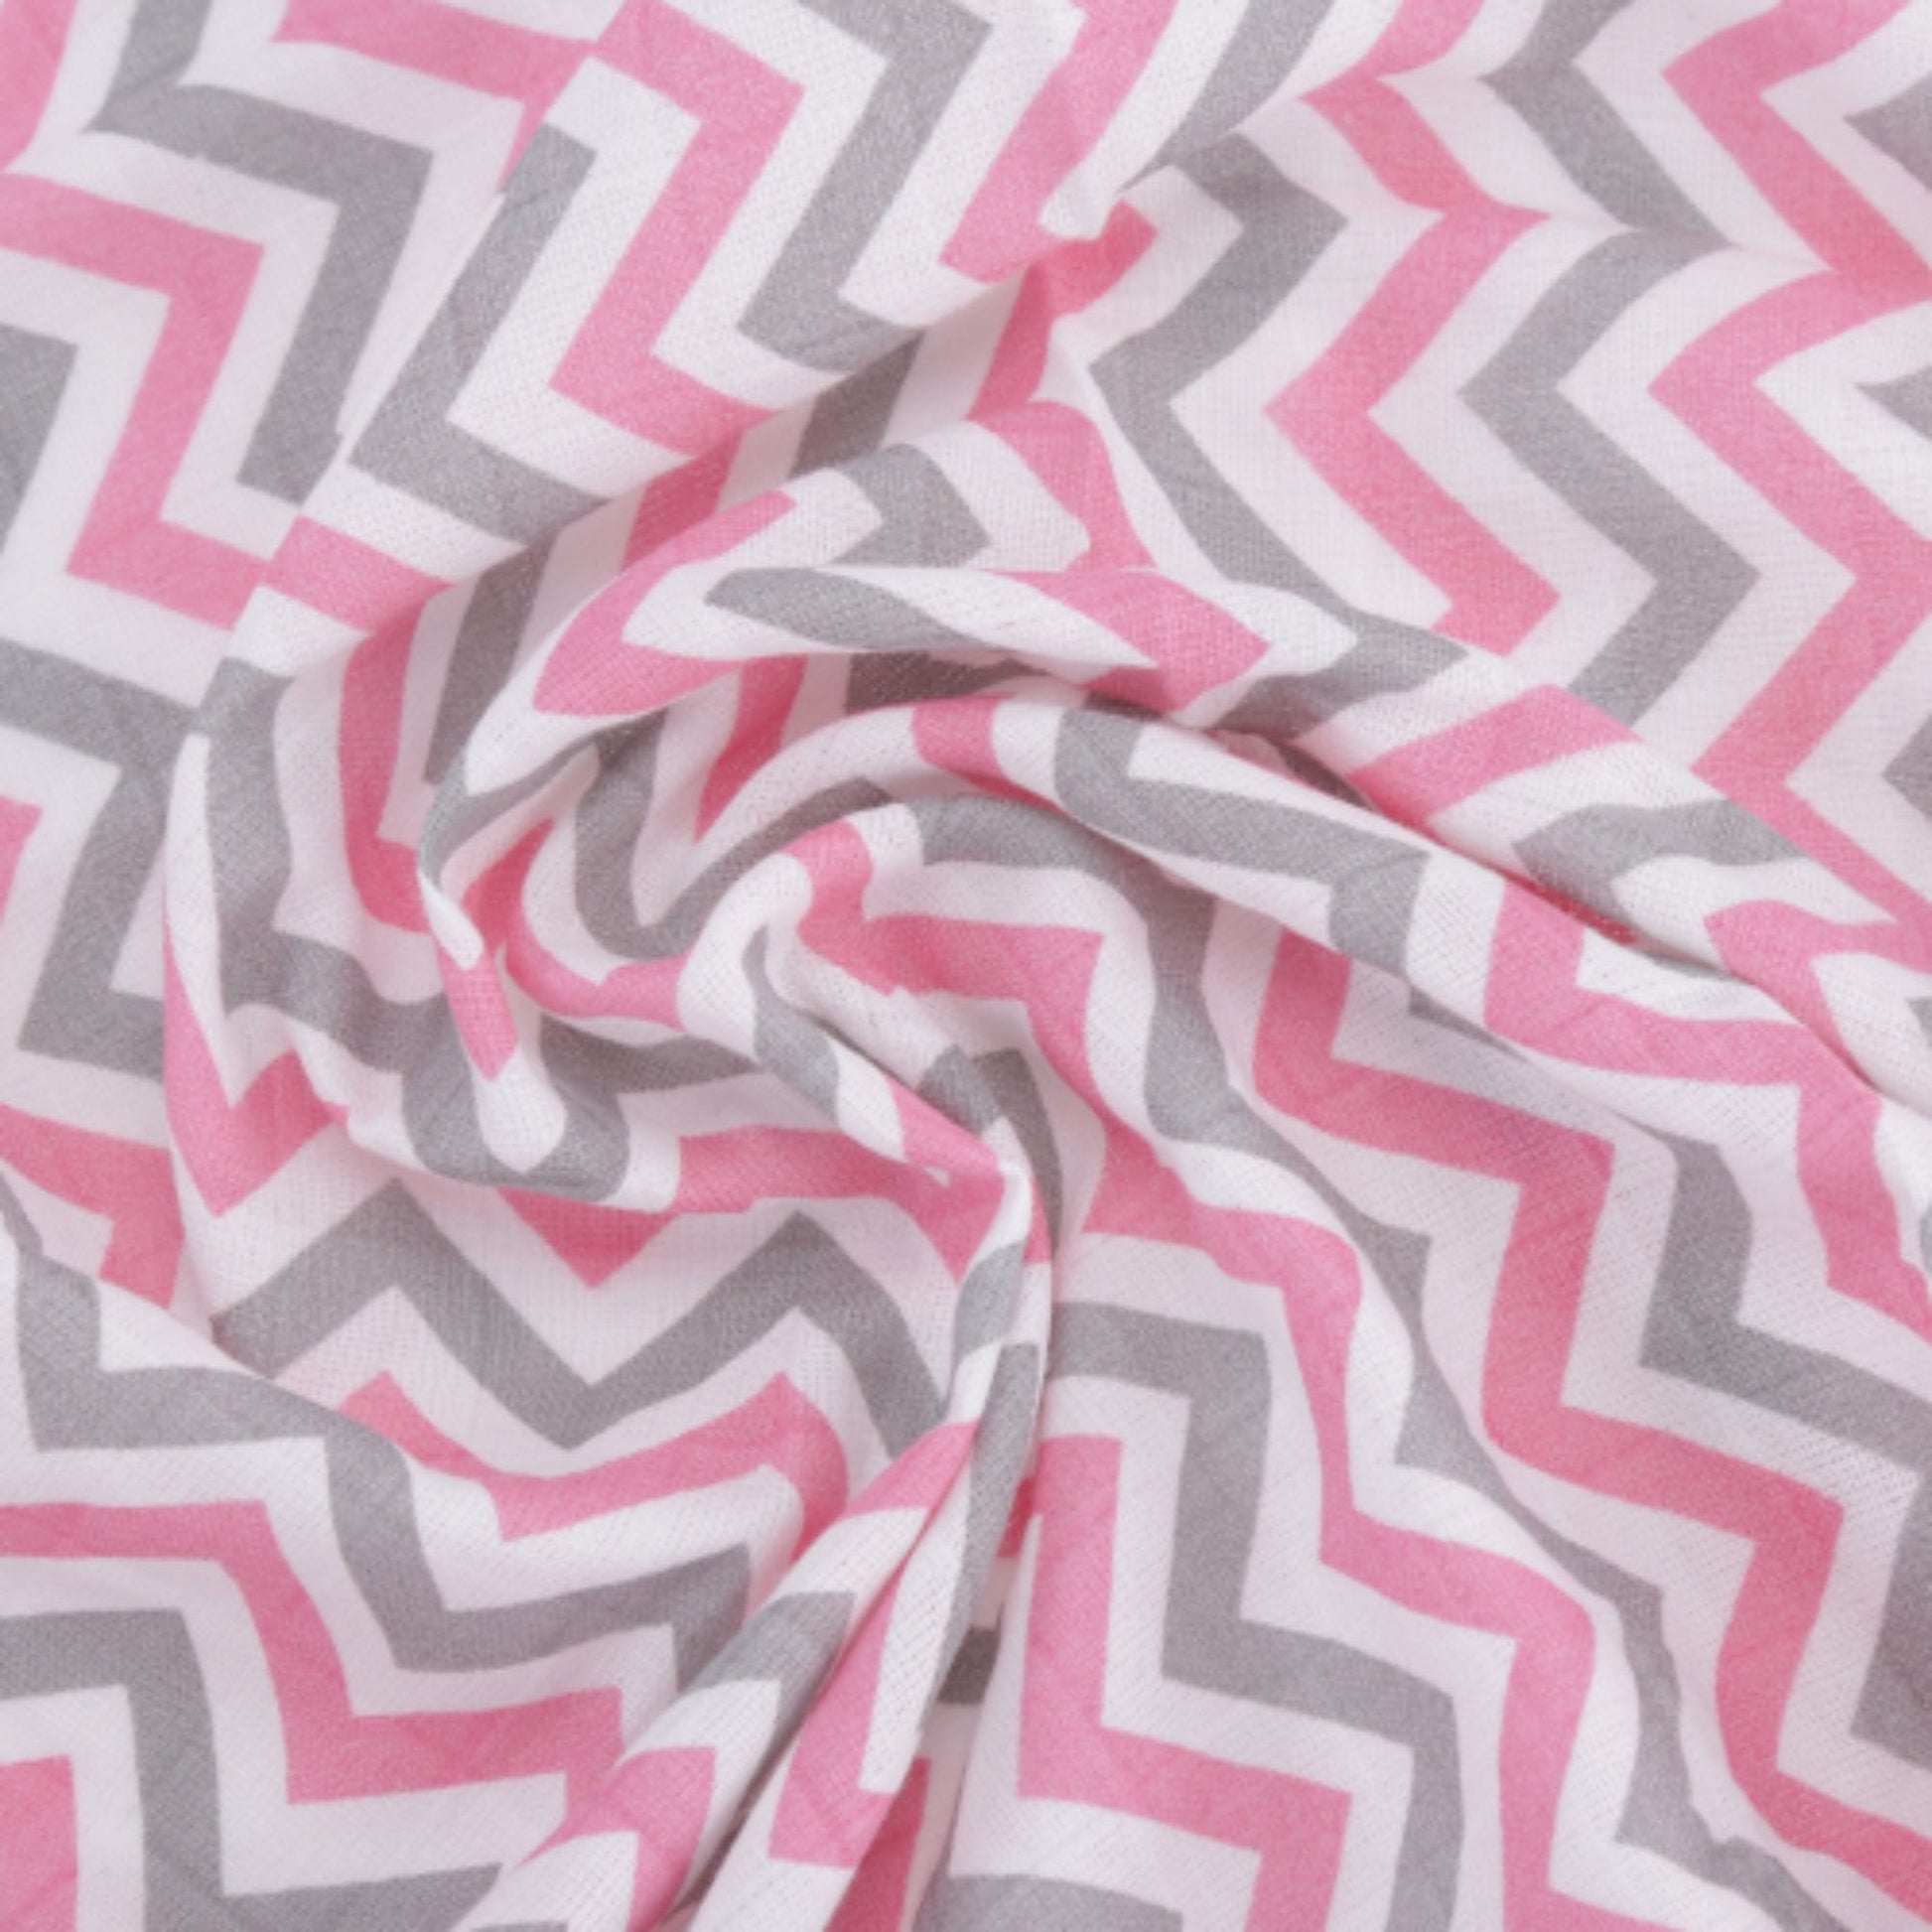 Chevron Stripes 100% Cotton Muslin Swaddle Pack Of 5 (Pink All, Dots) 100 x 100 CM - haus & kinder